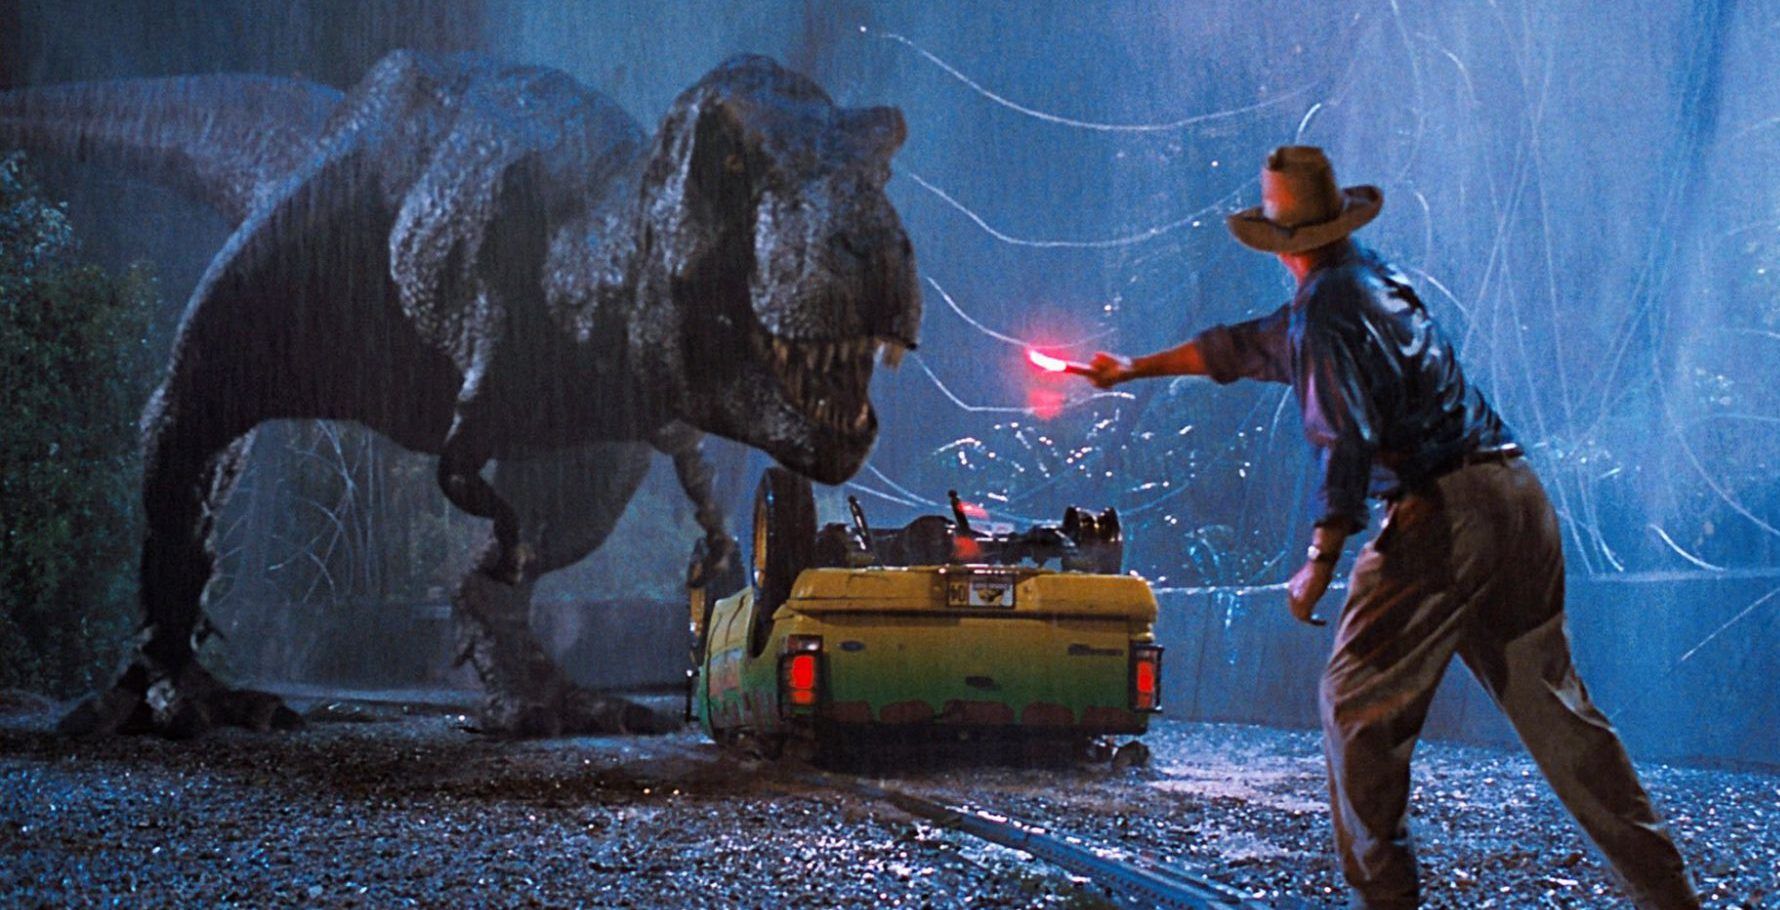 Jurassic Park The Shining & More Added To National Film Registry